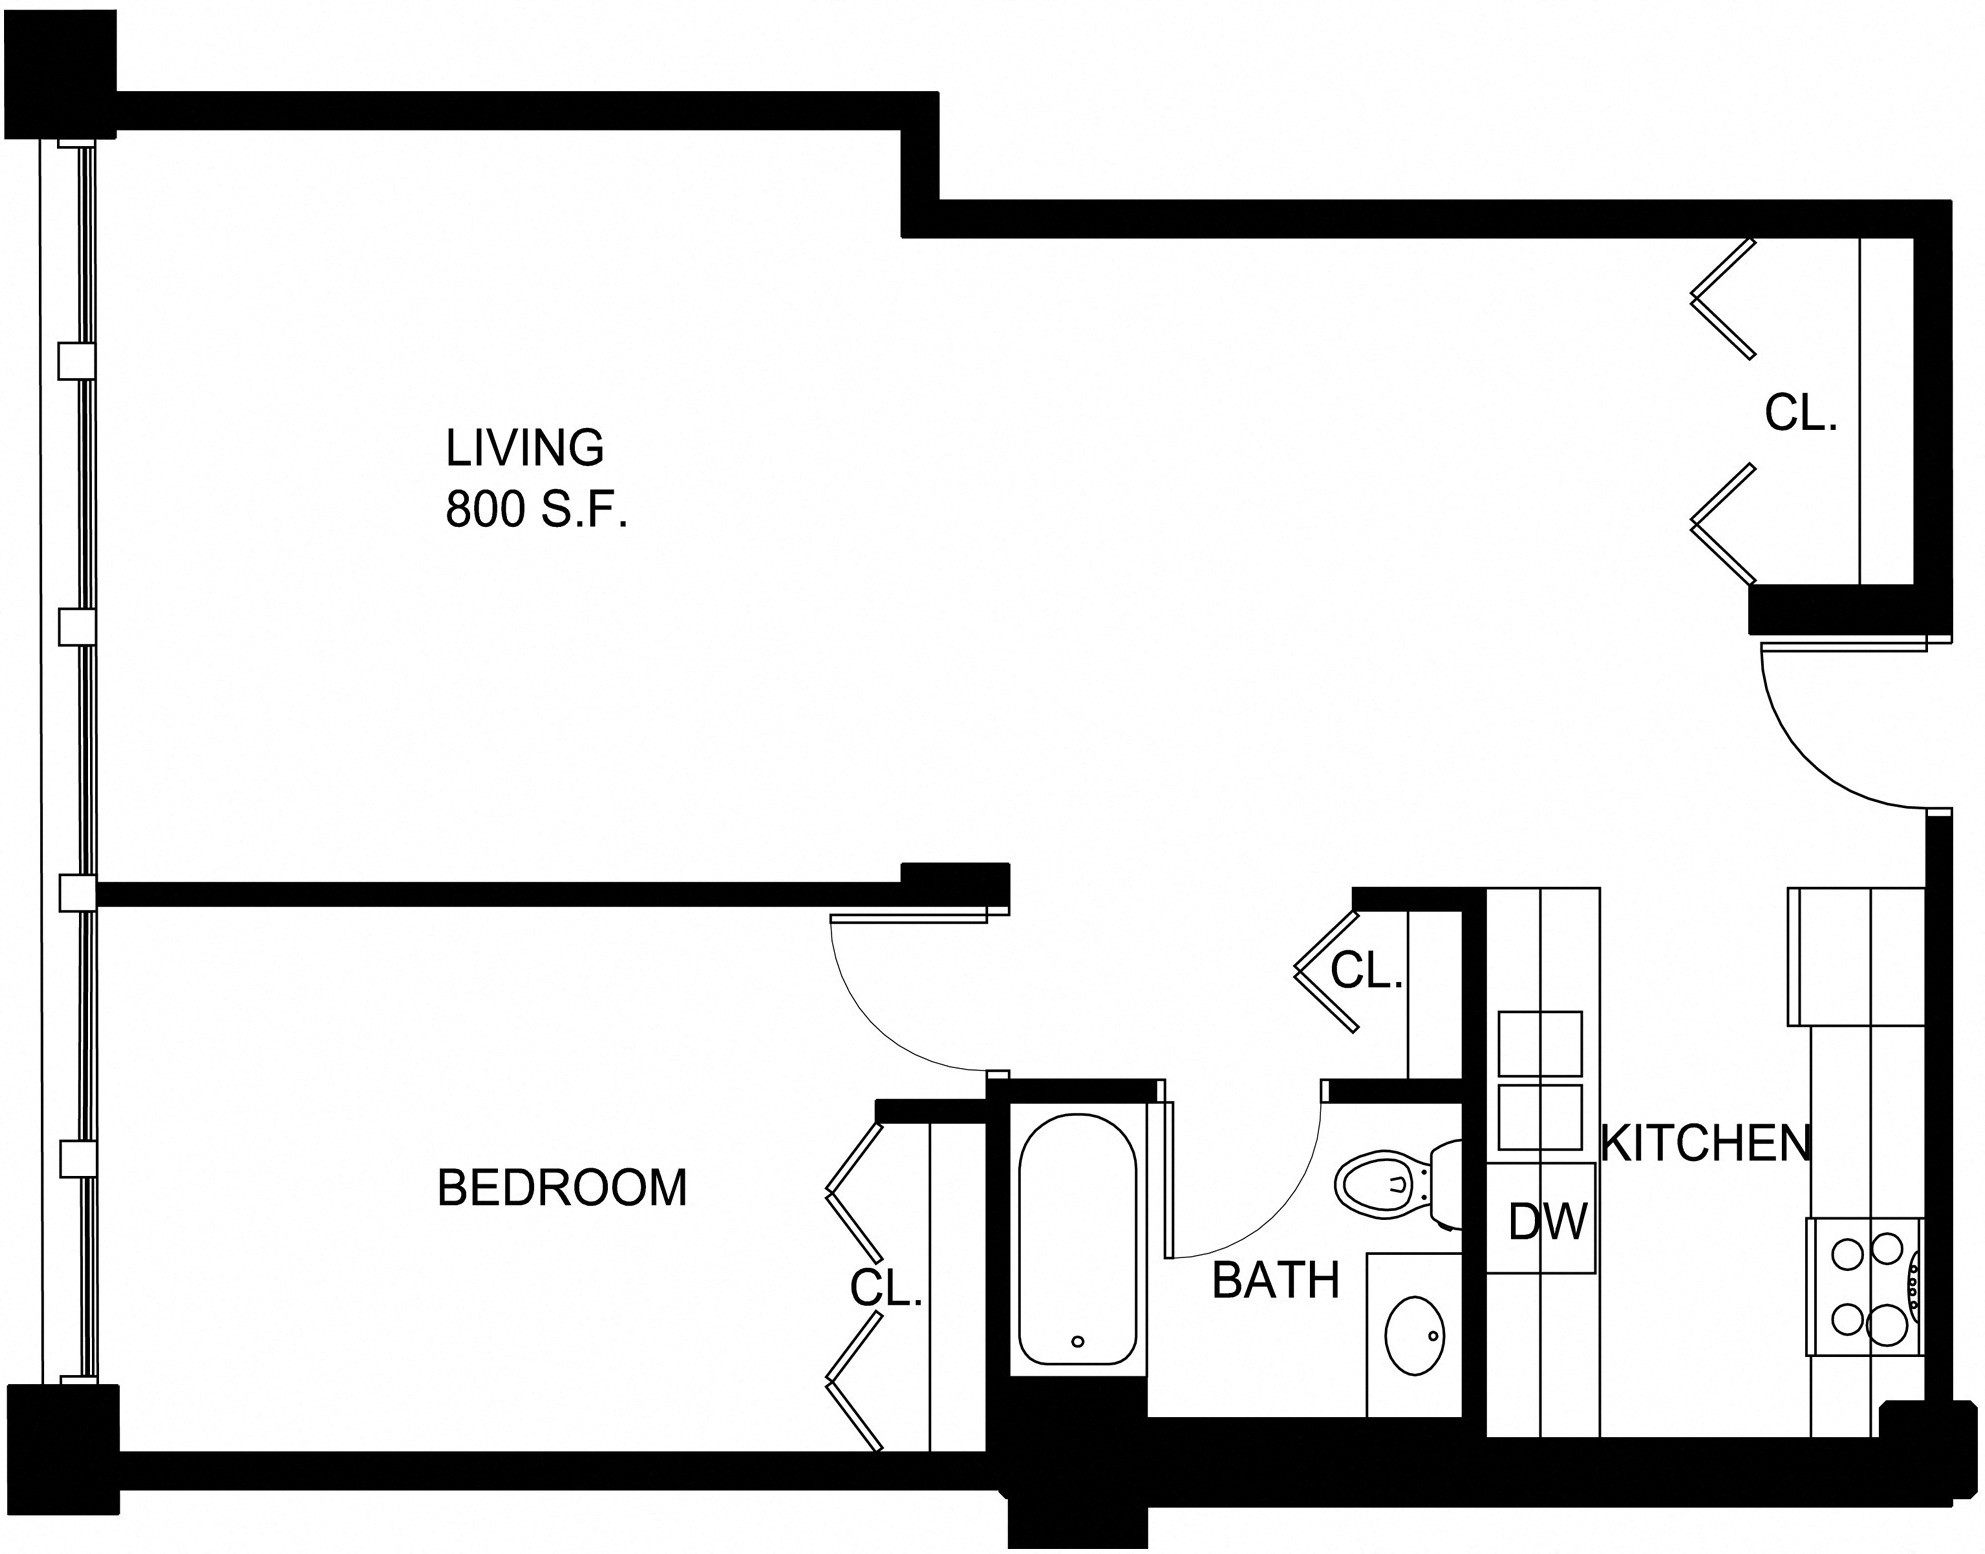 Floorplan for Apartment #P307, 1 bedroom unit at Halstead Providence